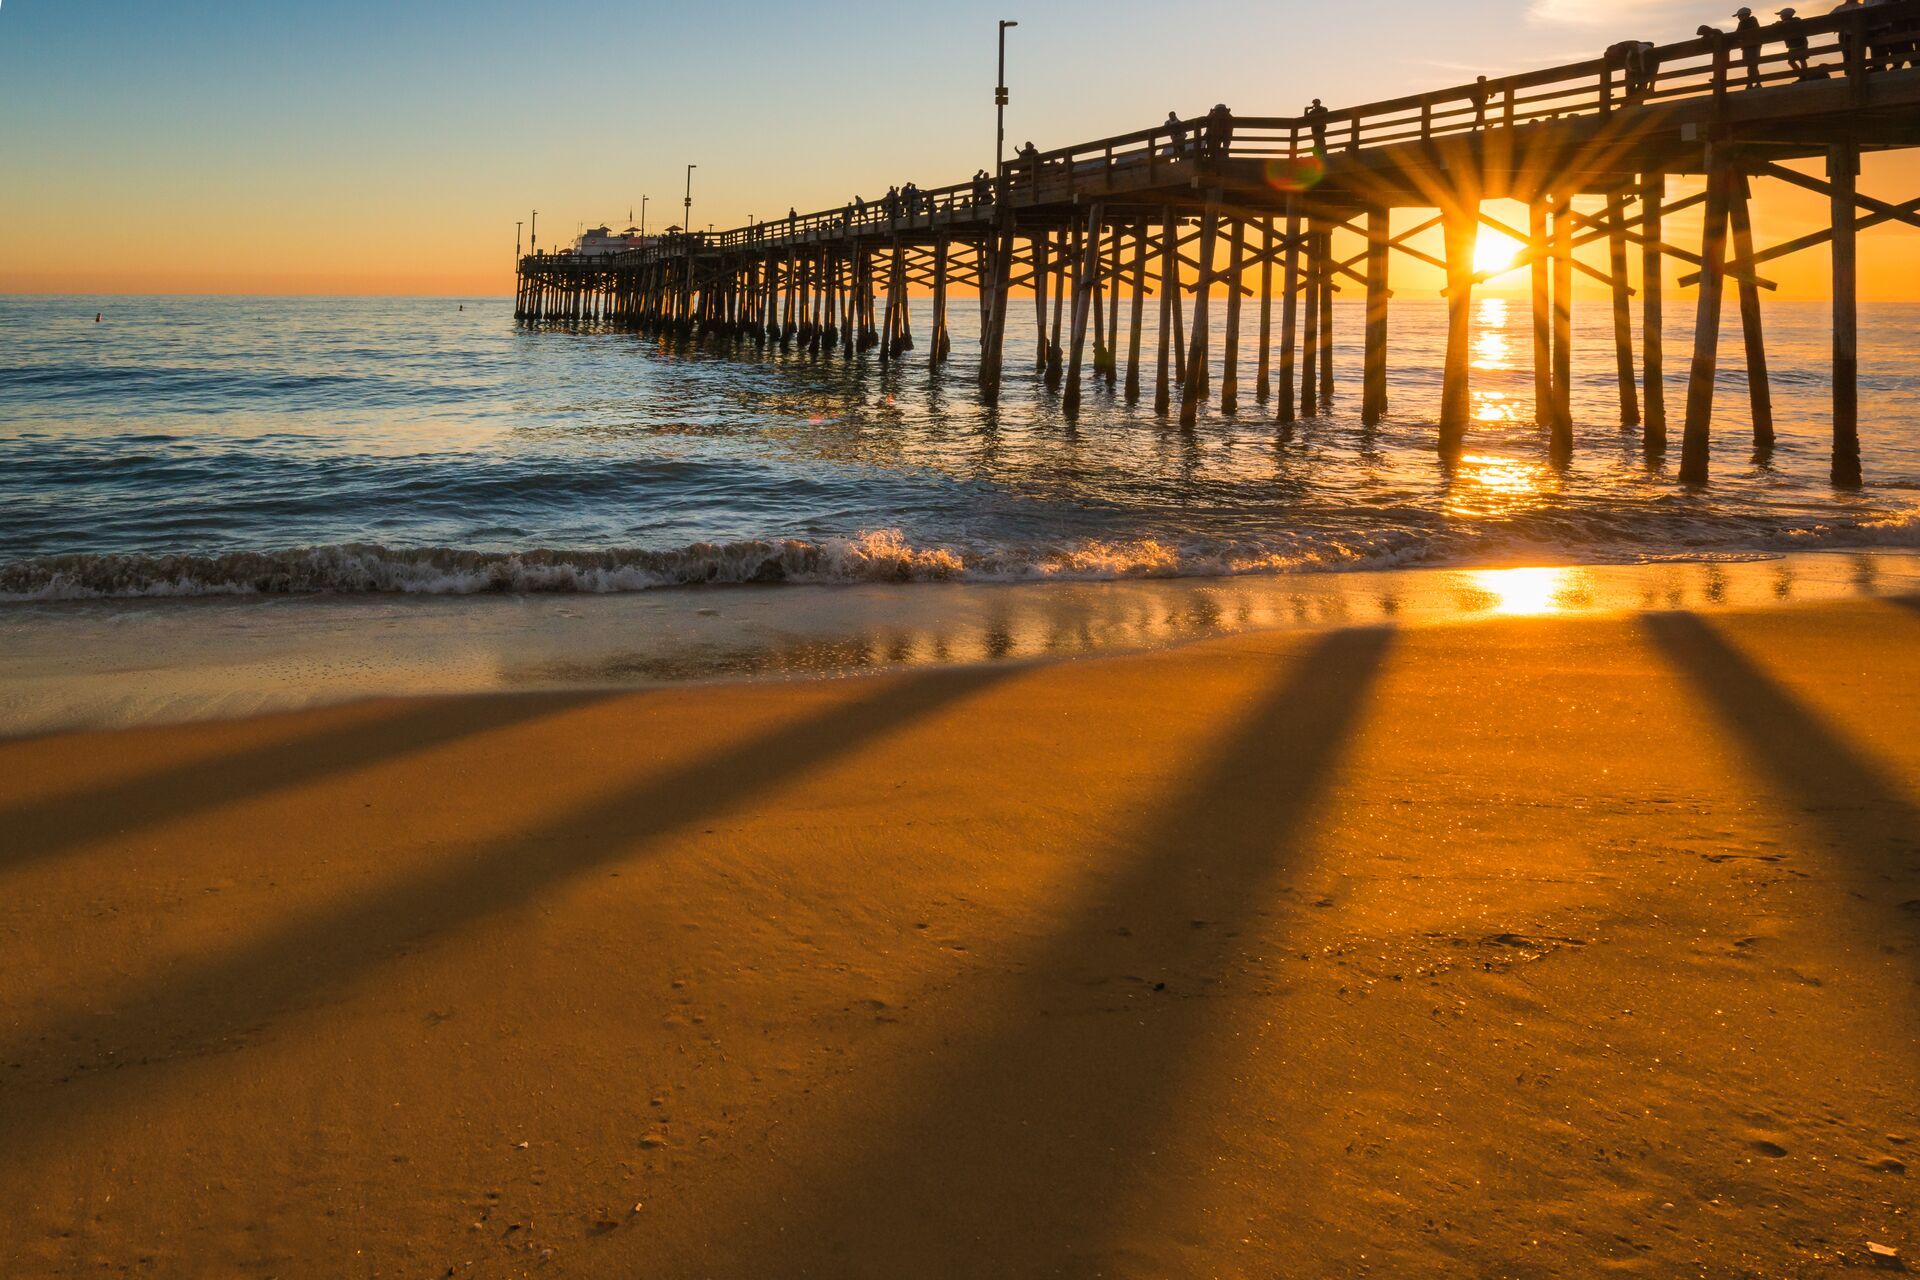 Image of sunset behind a pier, with the rays casting warm light and shadows across the ocean and sand in the foreground